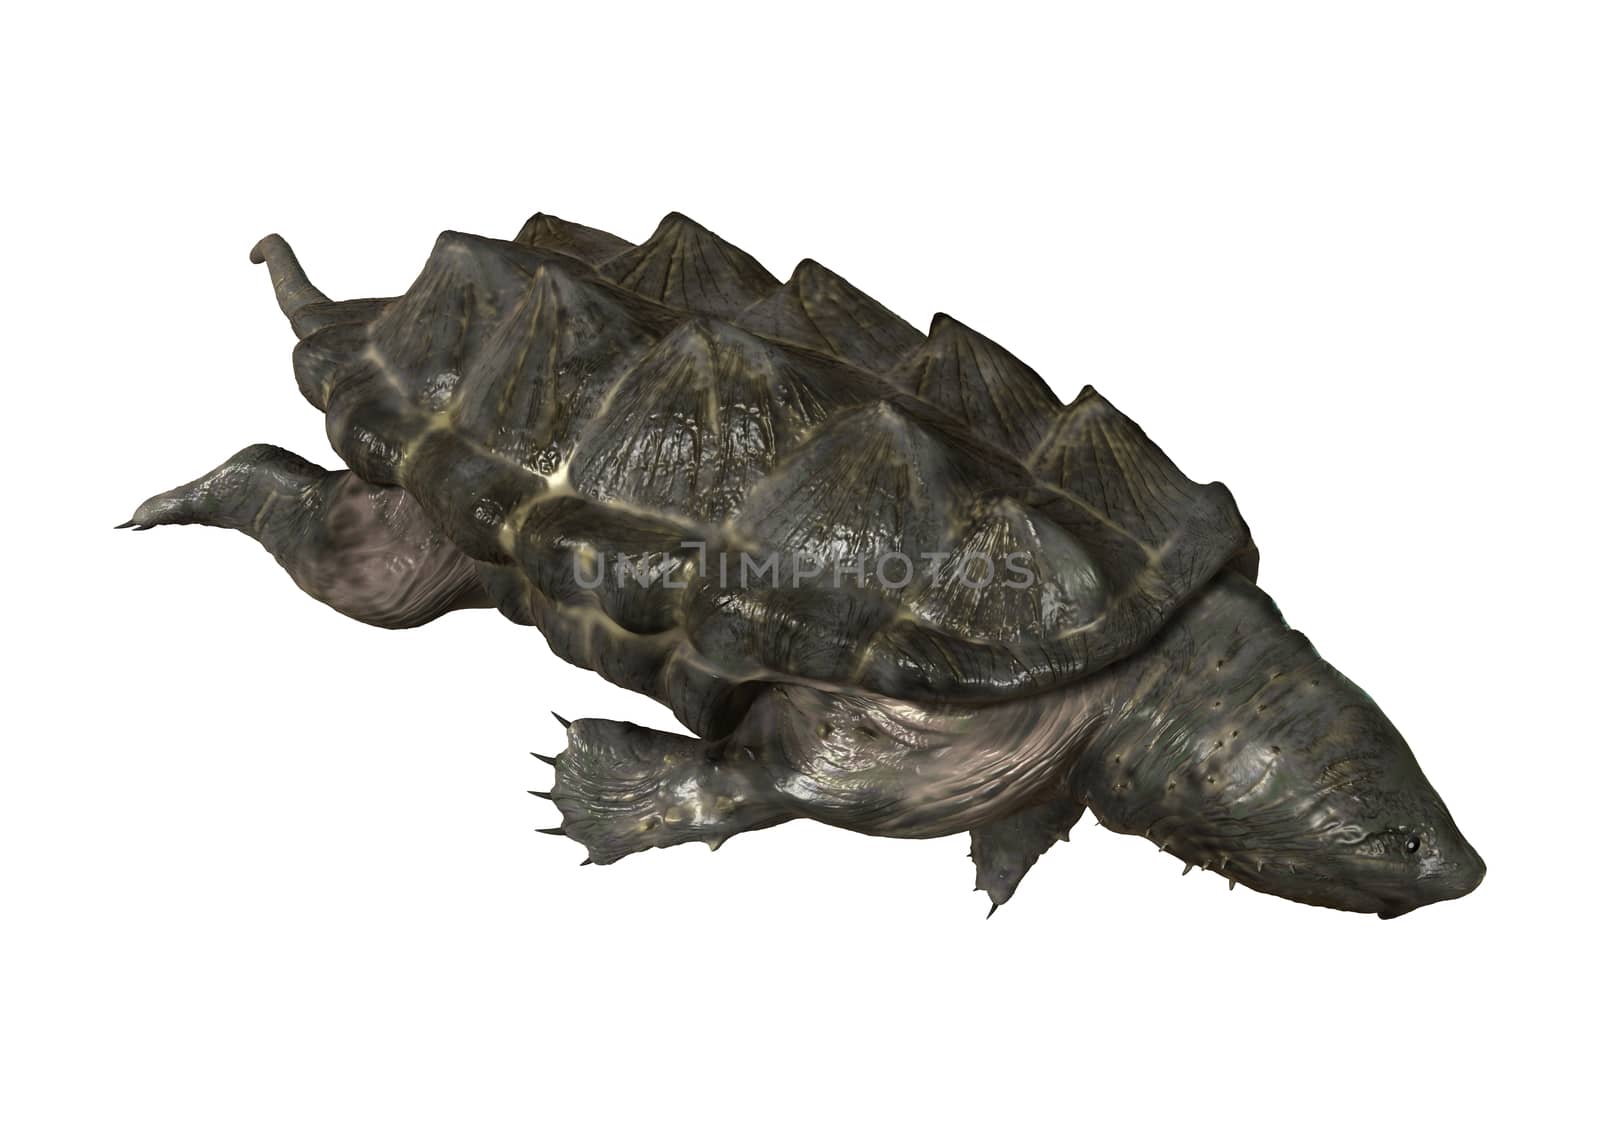 Alligator Snapping Turtle by Vac